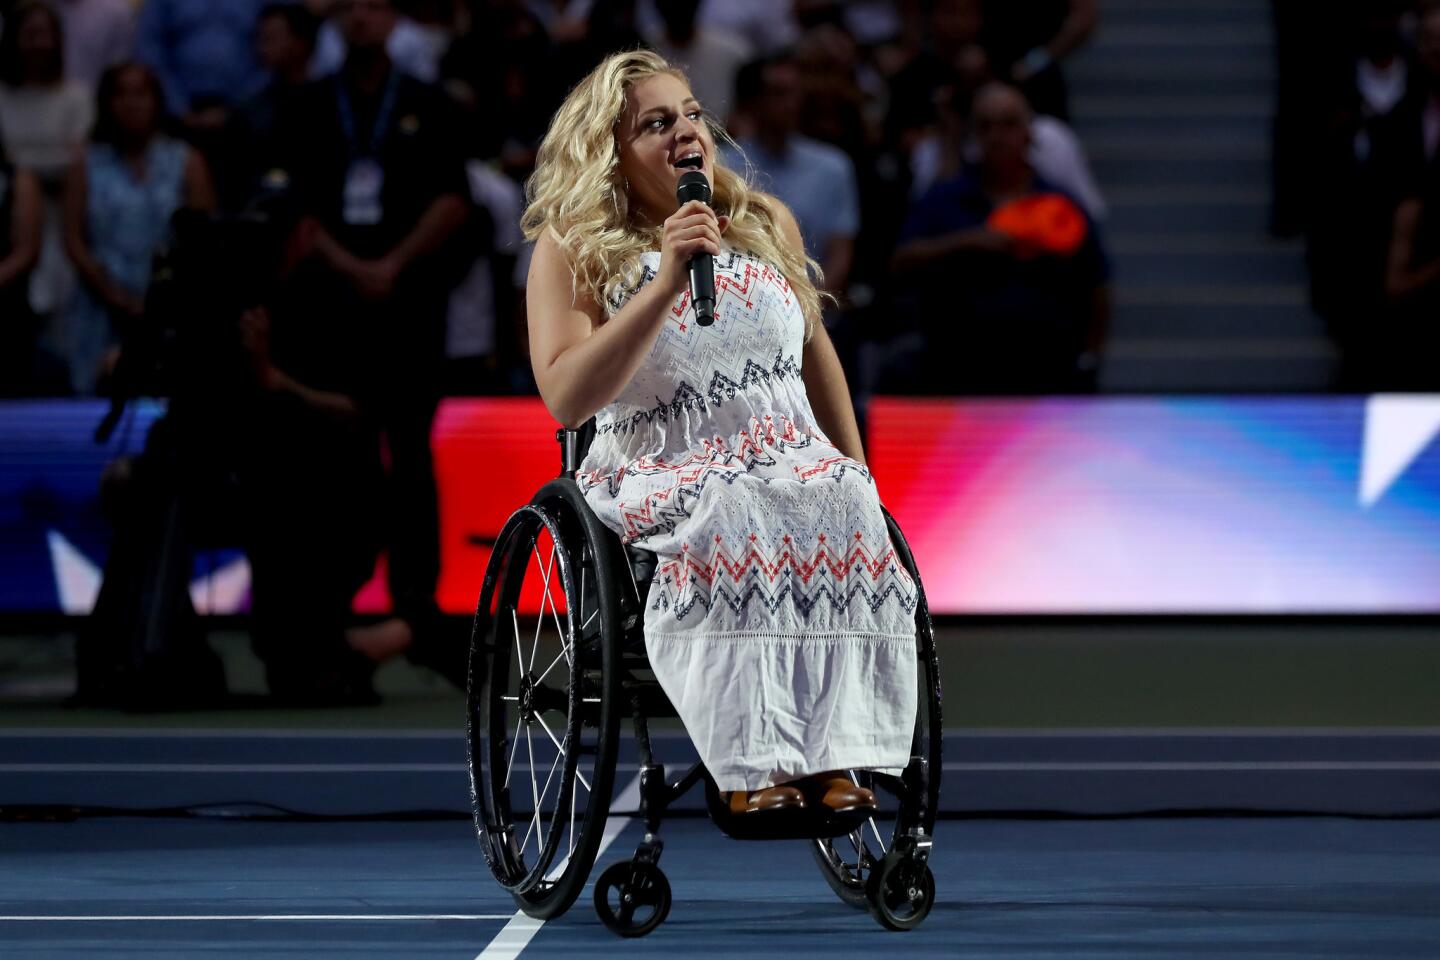 Tony Award winner Ali Stroker performs during the opening night ceremony at Arthur Ashe Stadium during day one of the 2019 U.S. Open at the USTA Billie Jean King National Tennis Center on Aug. 26, 2019, in the Flushing, Queens.